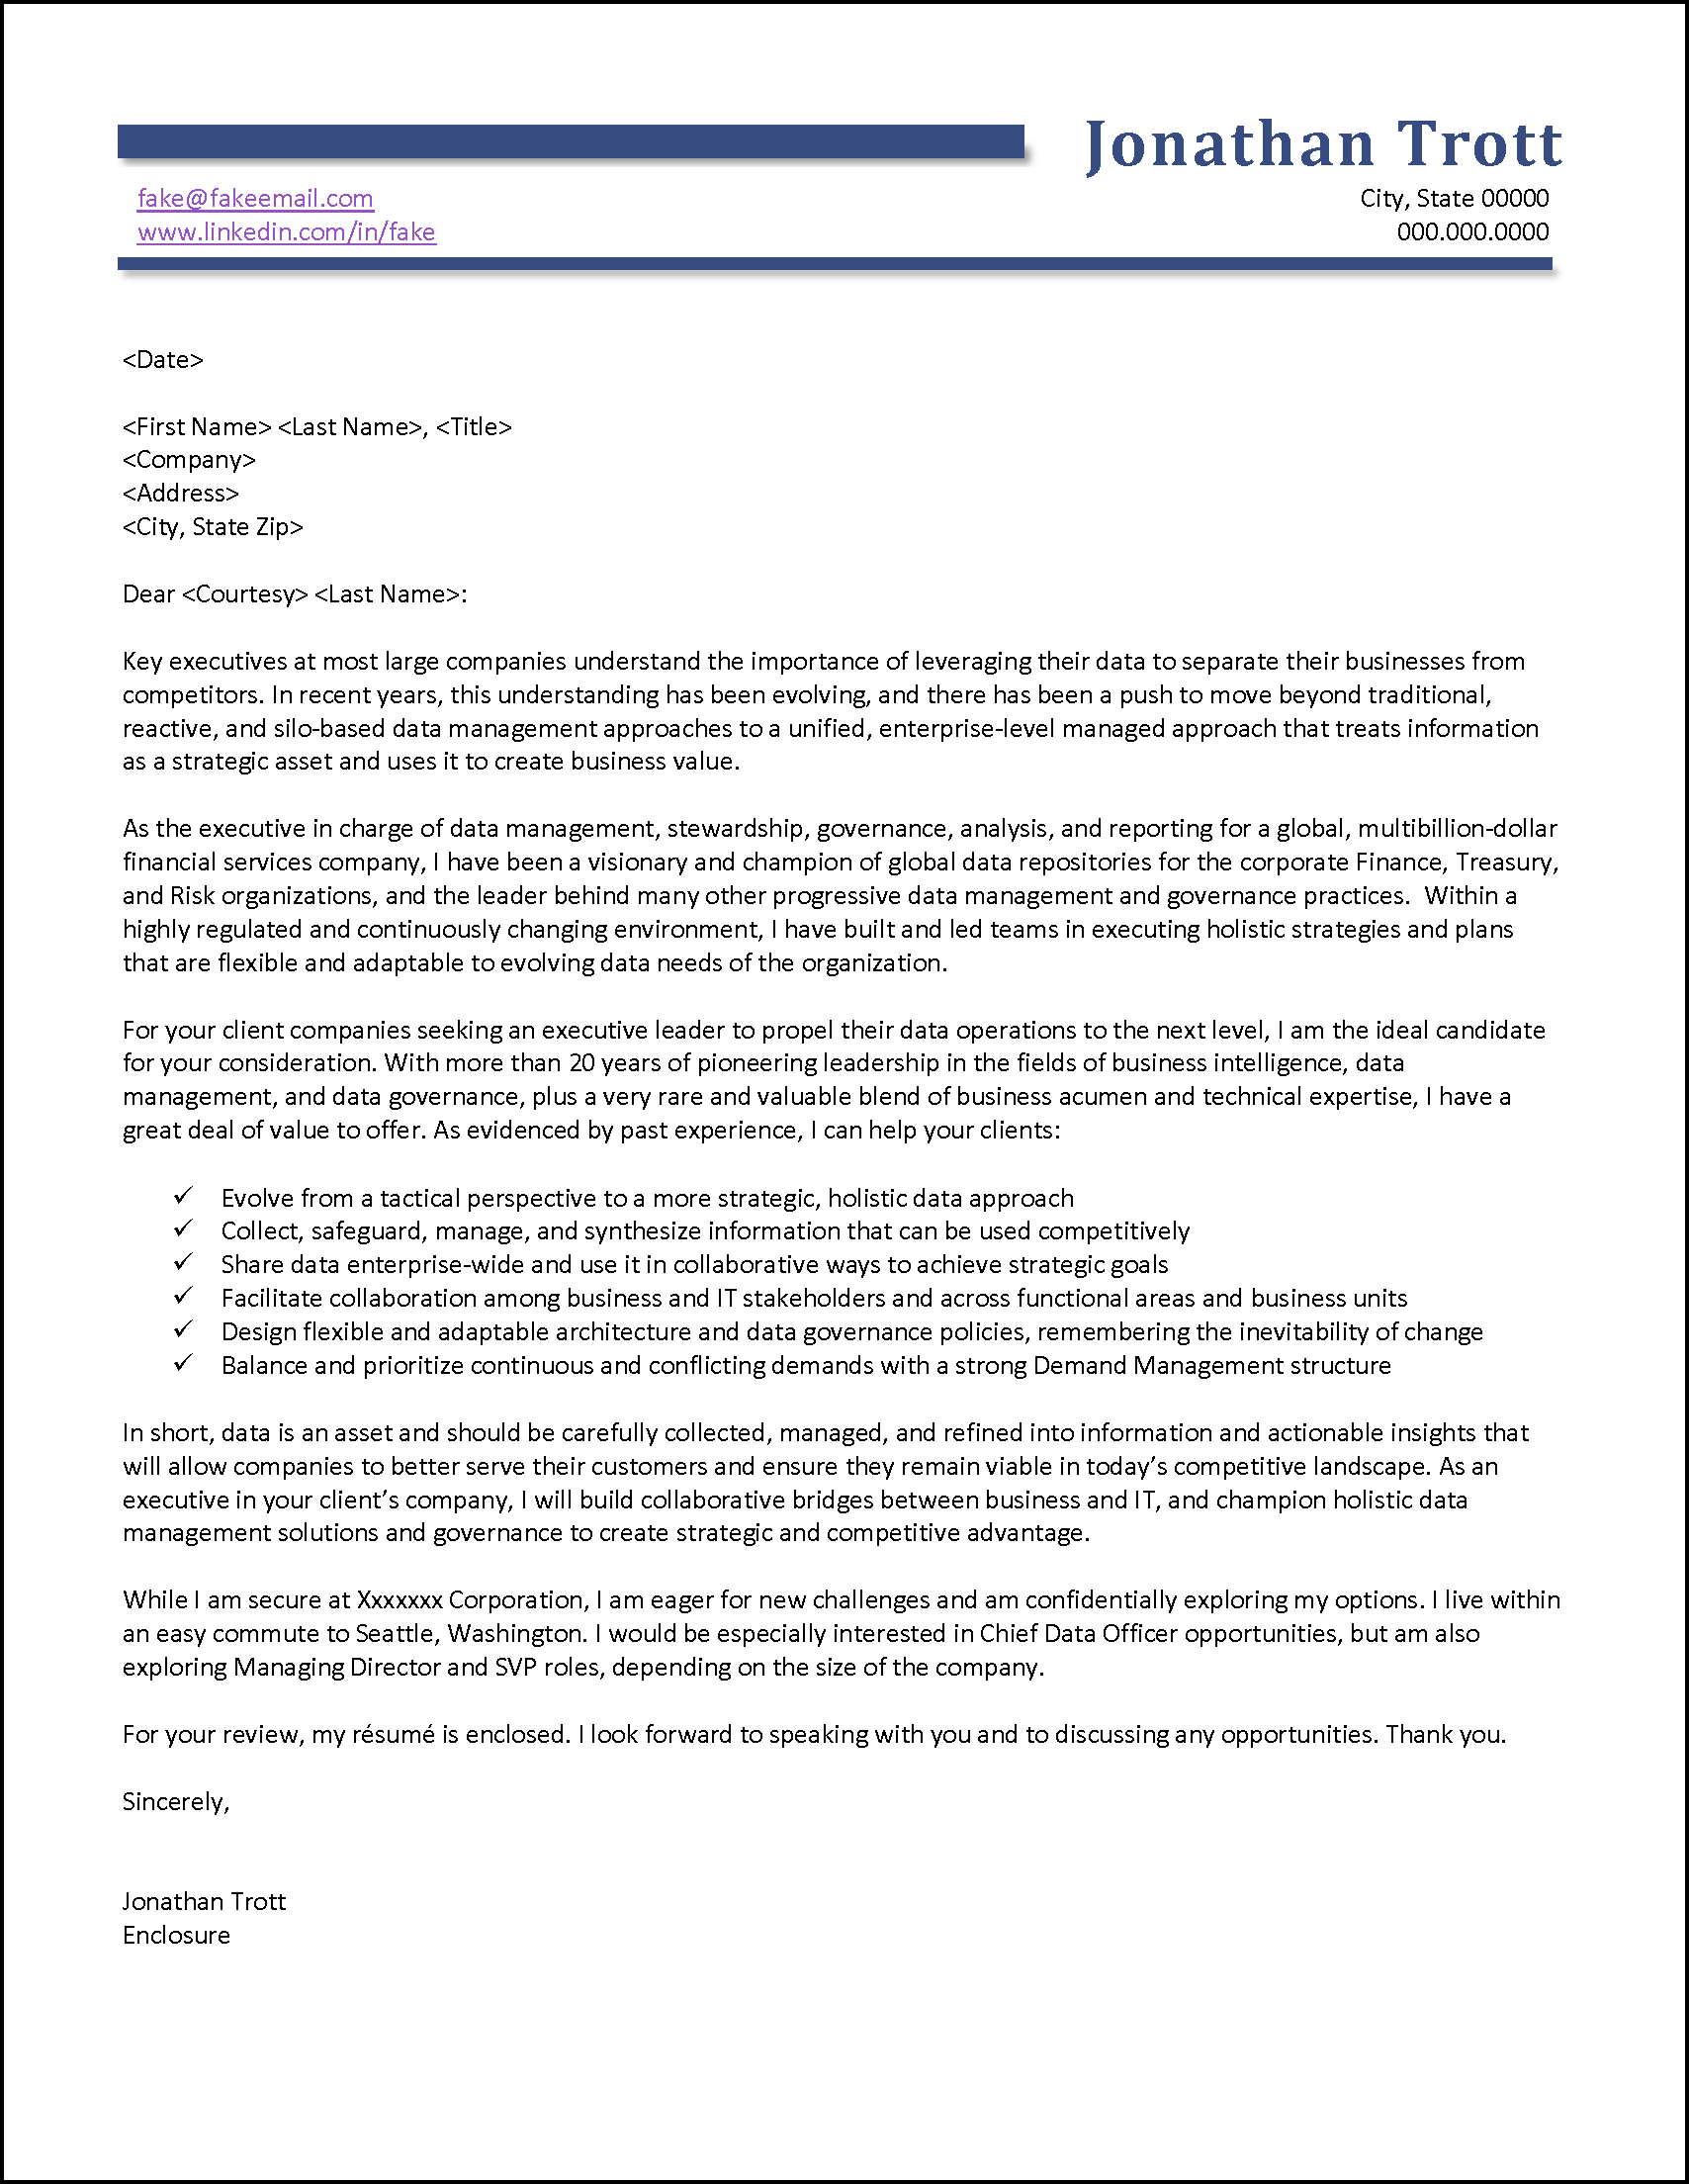 Example Introductory Letter for Job Recruiters